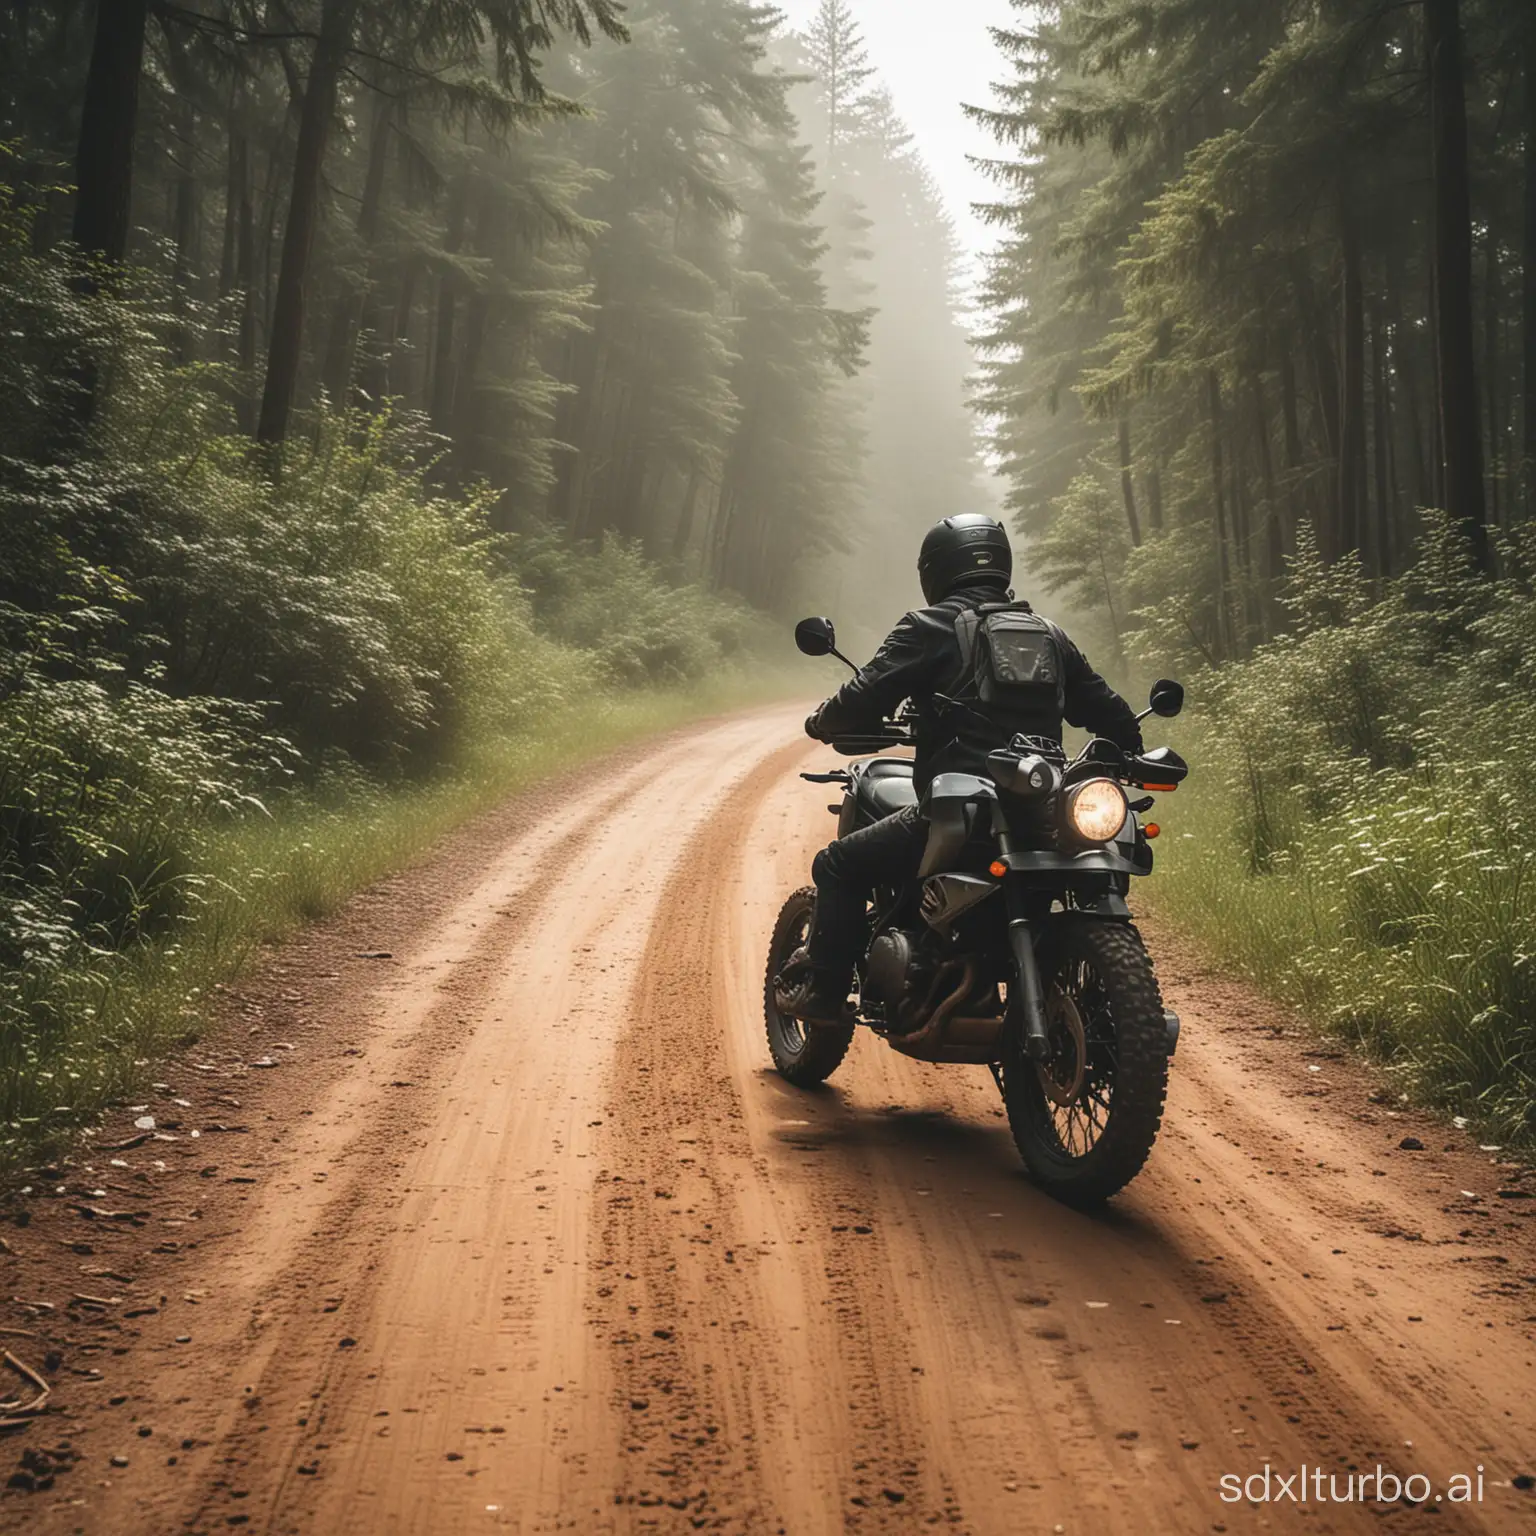 Thrilling-Motorcycle-Adventure-through-Scenic-Landscapes